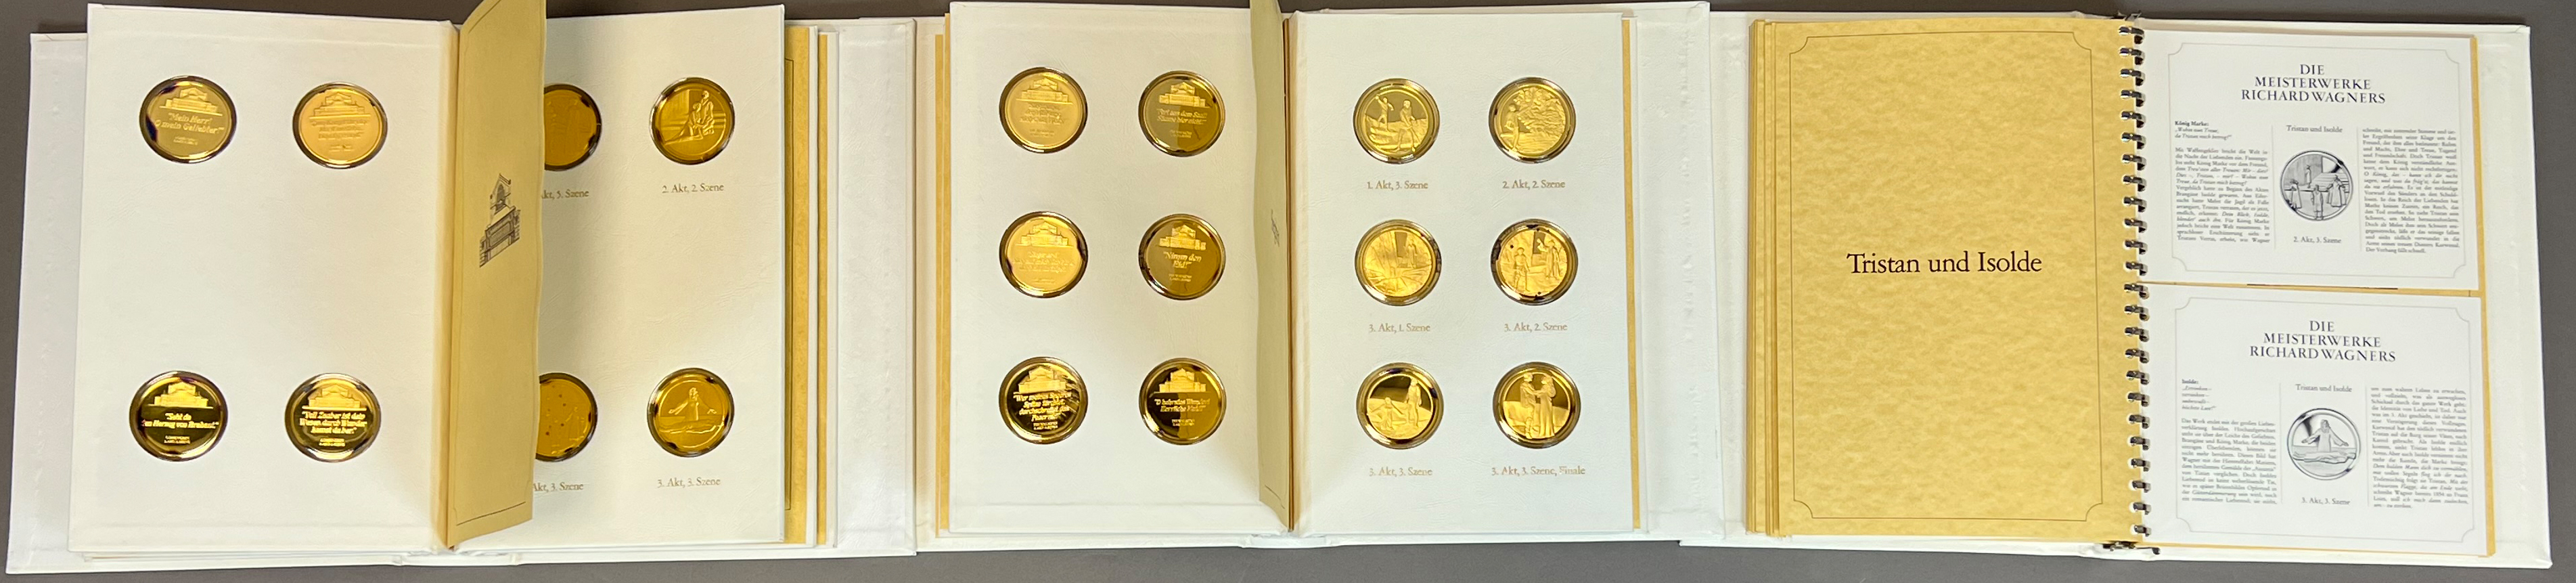 Collection of medals for the 100th anniversary of the Bayreuth Festival "Richard Wagner's Masterpie - Image 2 of 6